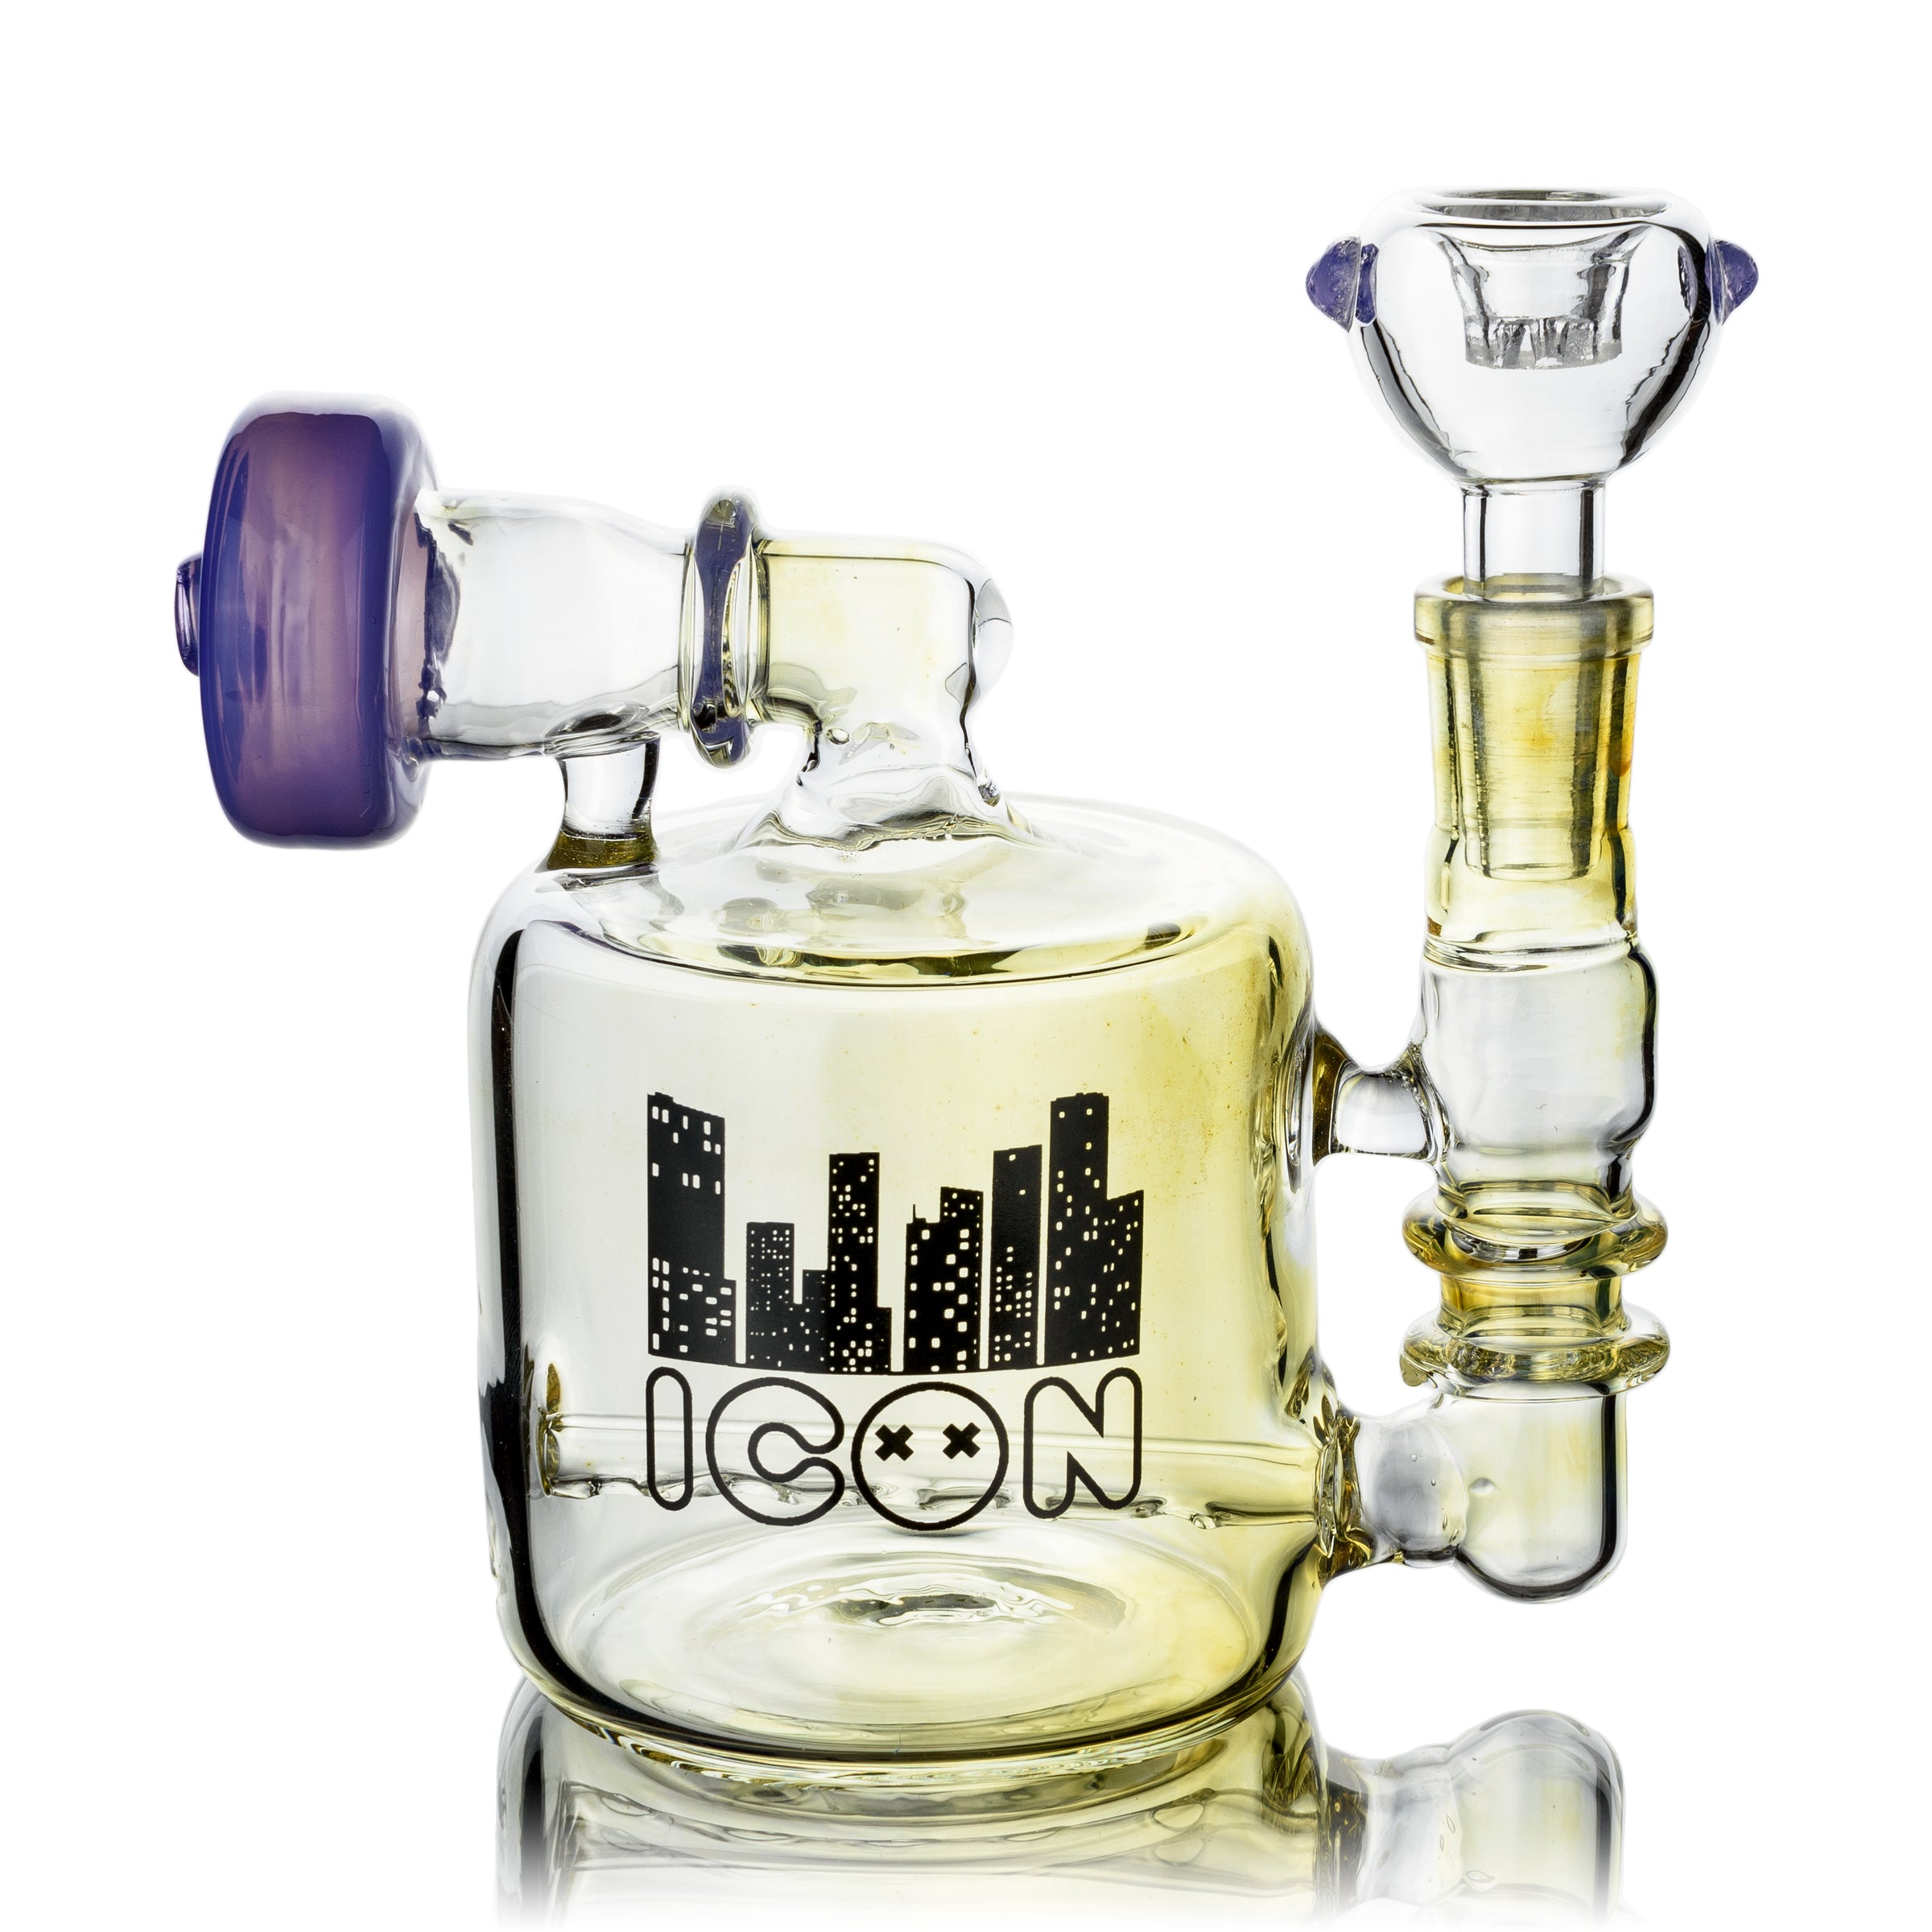 5" Cylinder Rig w/ Inline Diffuser, by Icon Glass (free banger included) - Bat Kountry